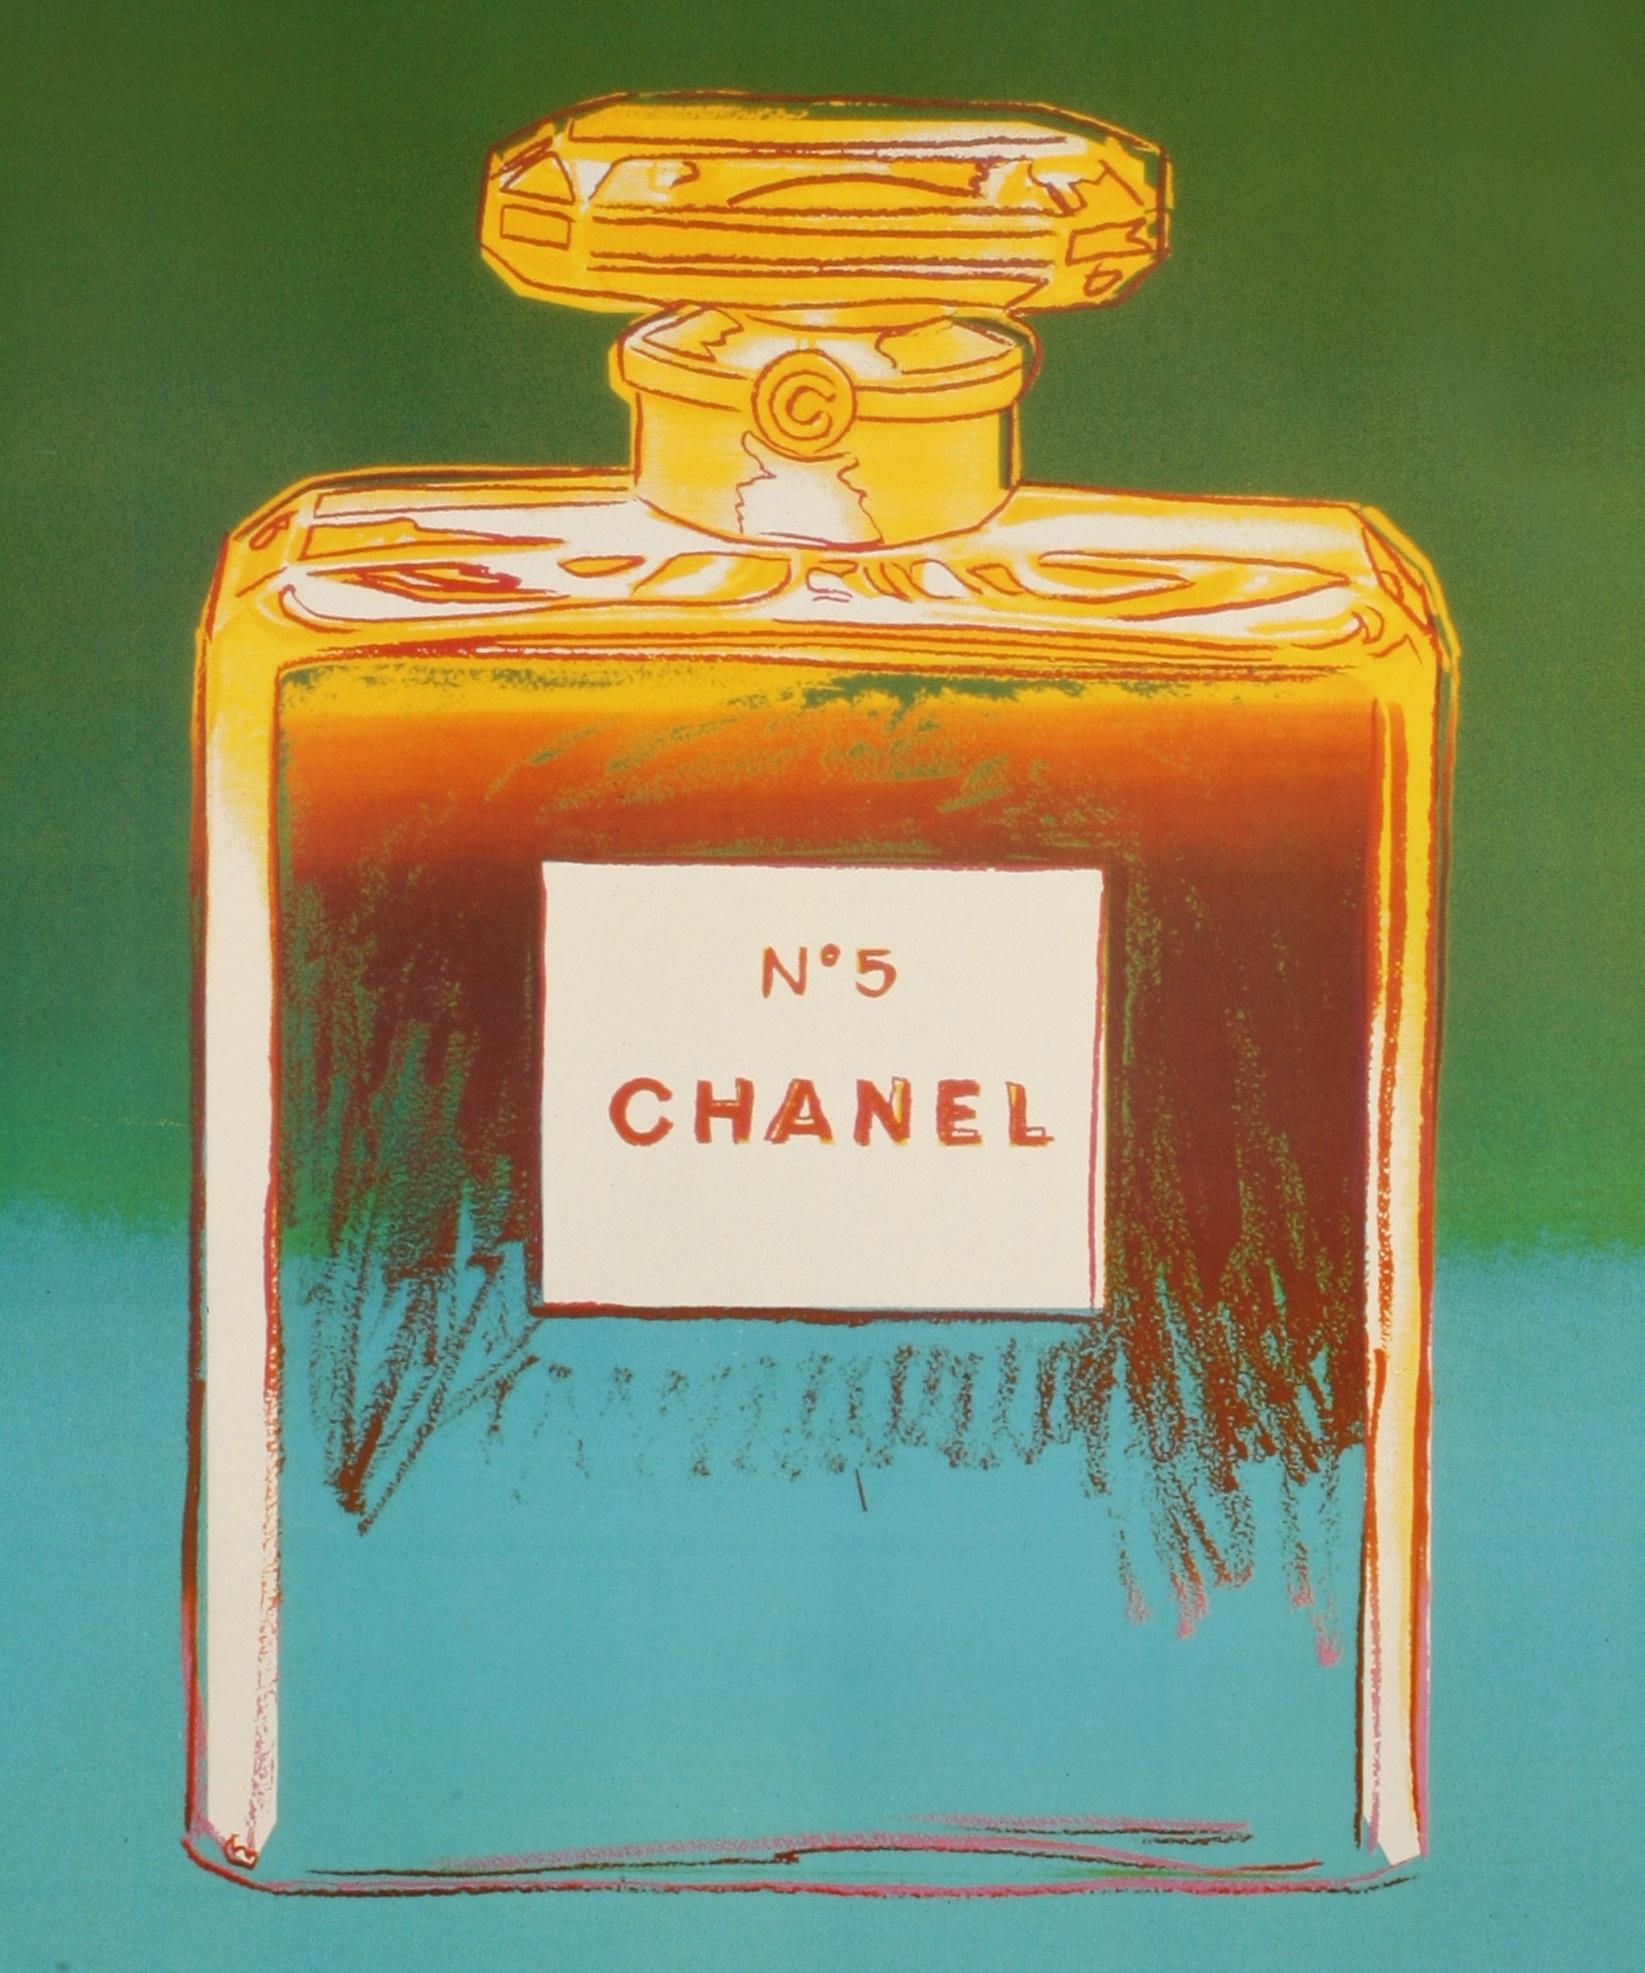 Original Pop Art Poster-Andy Warhol-Chanel No. 5 Perfum-Haute Couture, 1997

Poster originally produced by Andy Warhol in the 1980s.

Additional details:
Materials and techniques: colour lithograph on paper
Color: multi-color
Features: